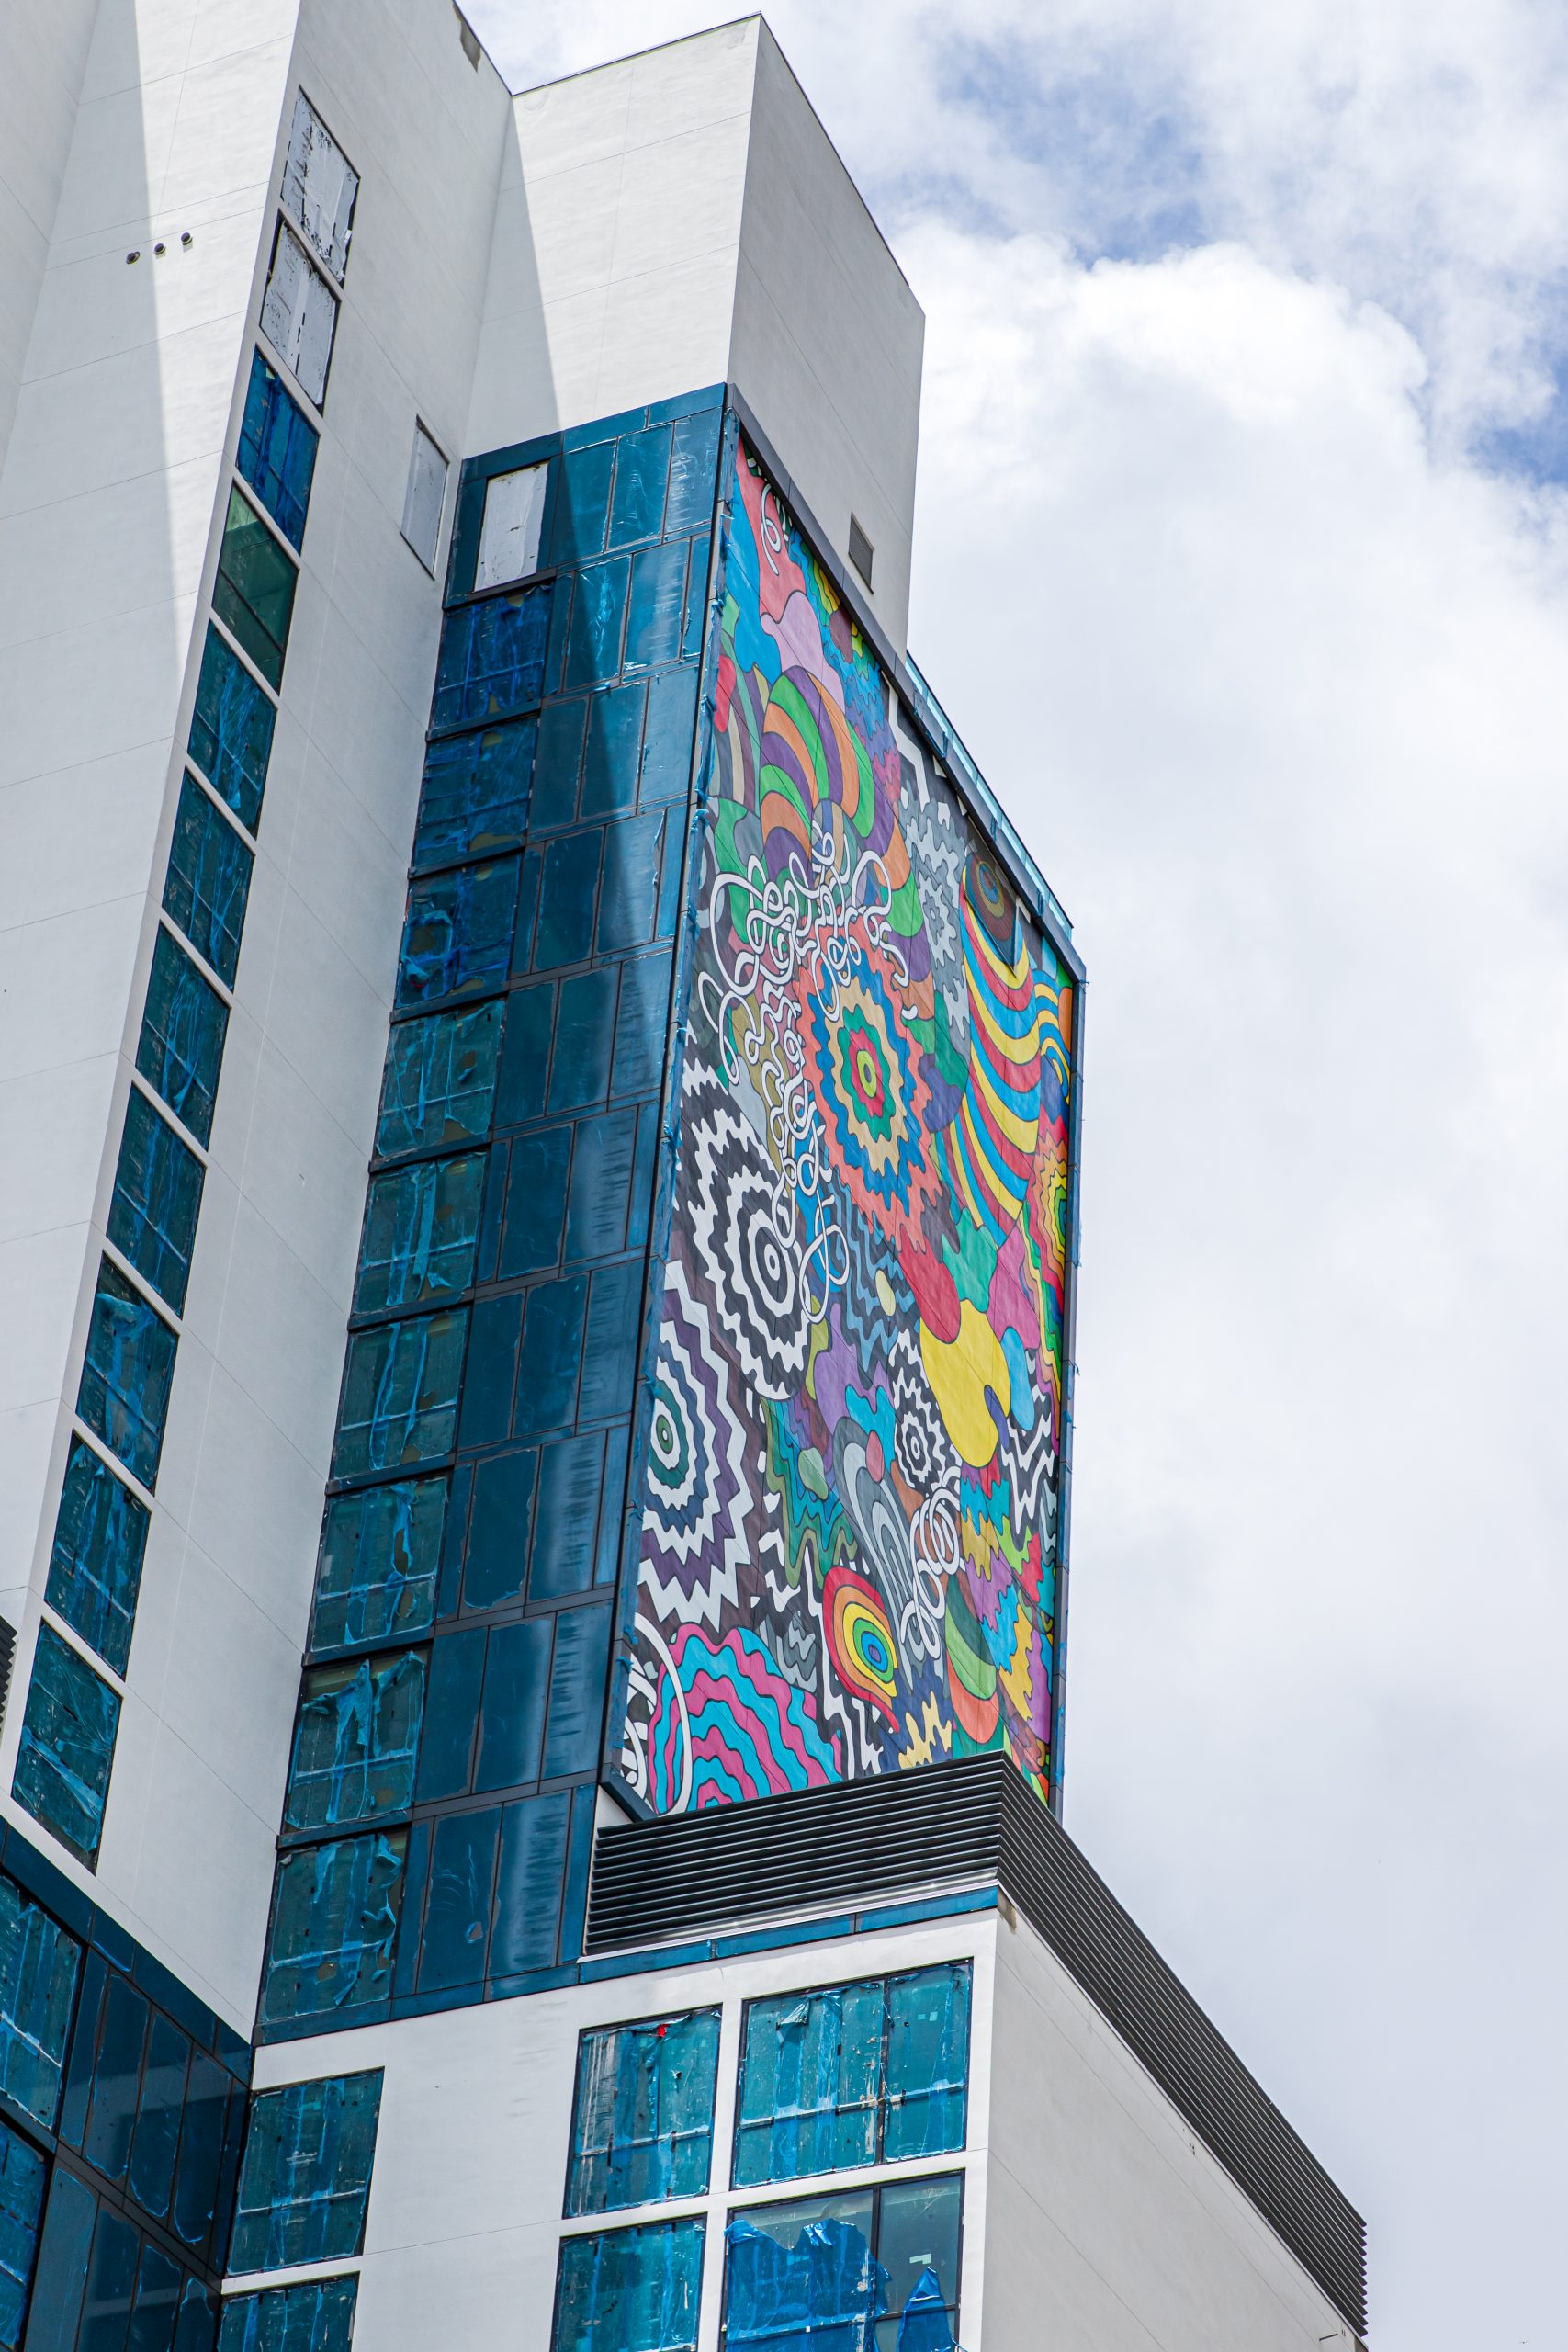 CitizenM Brickell. Photo by Skyalign.